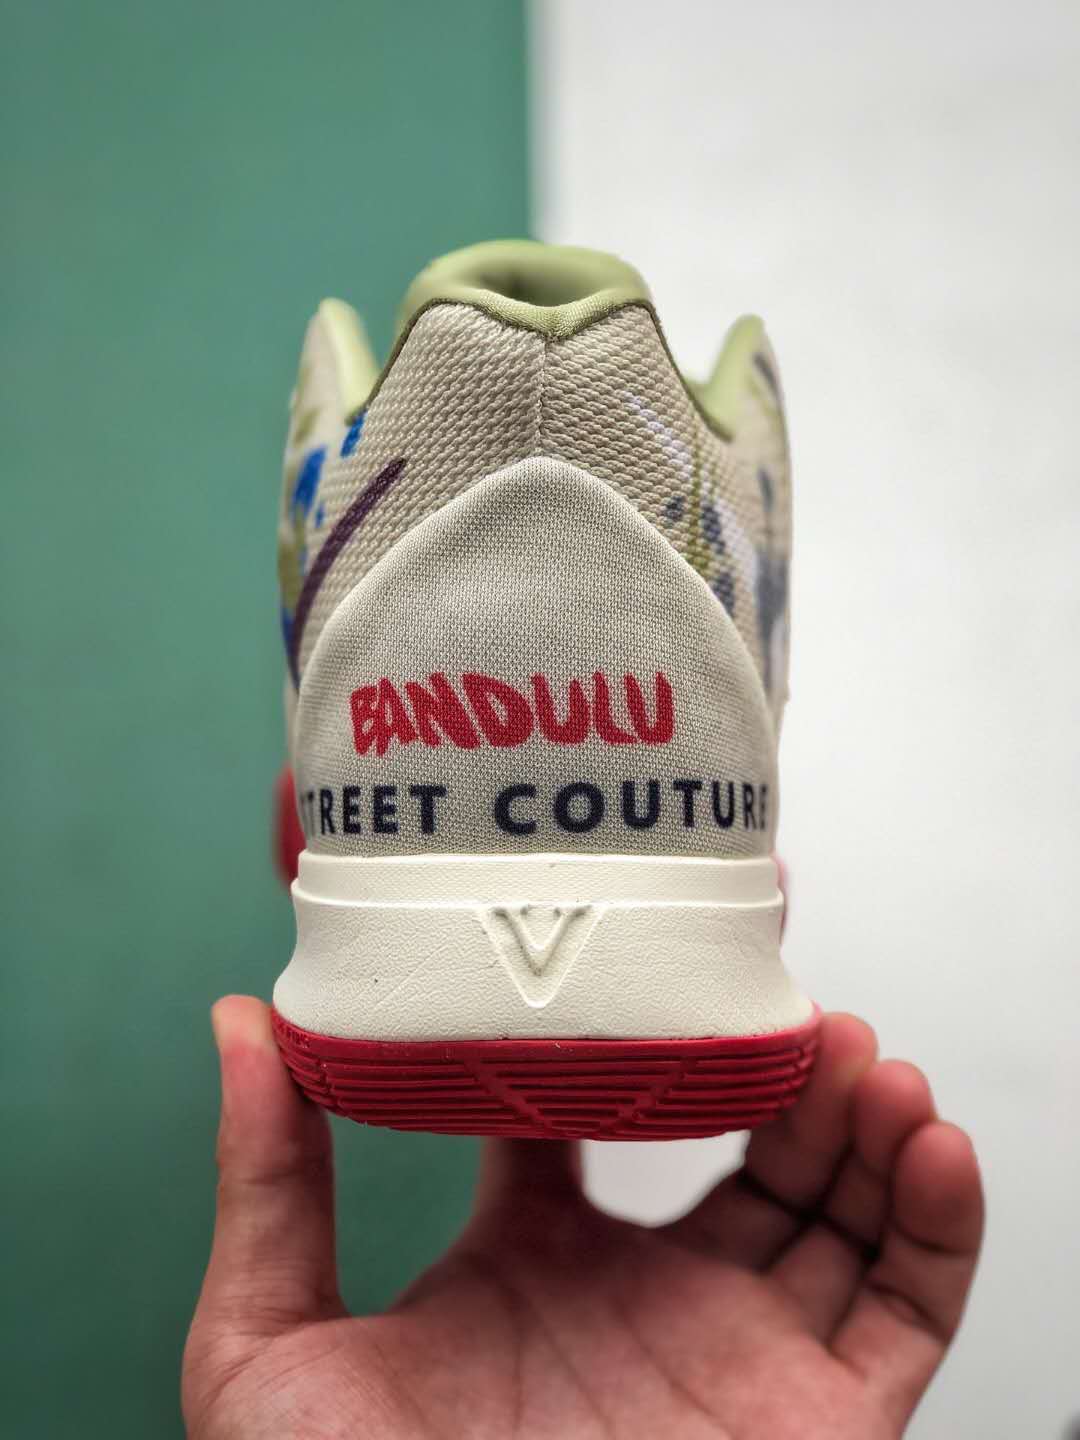 Bandulu x Nike Kyrie 5 EP Multi Color CK5837 100 - Premium Collaboration for Unmatched Performance